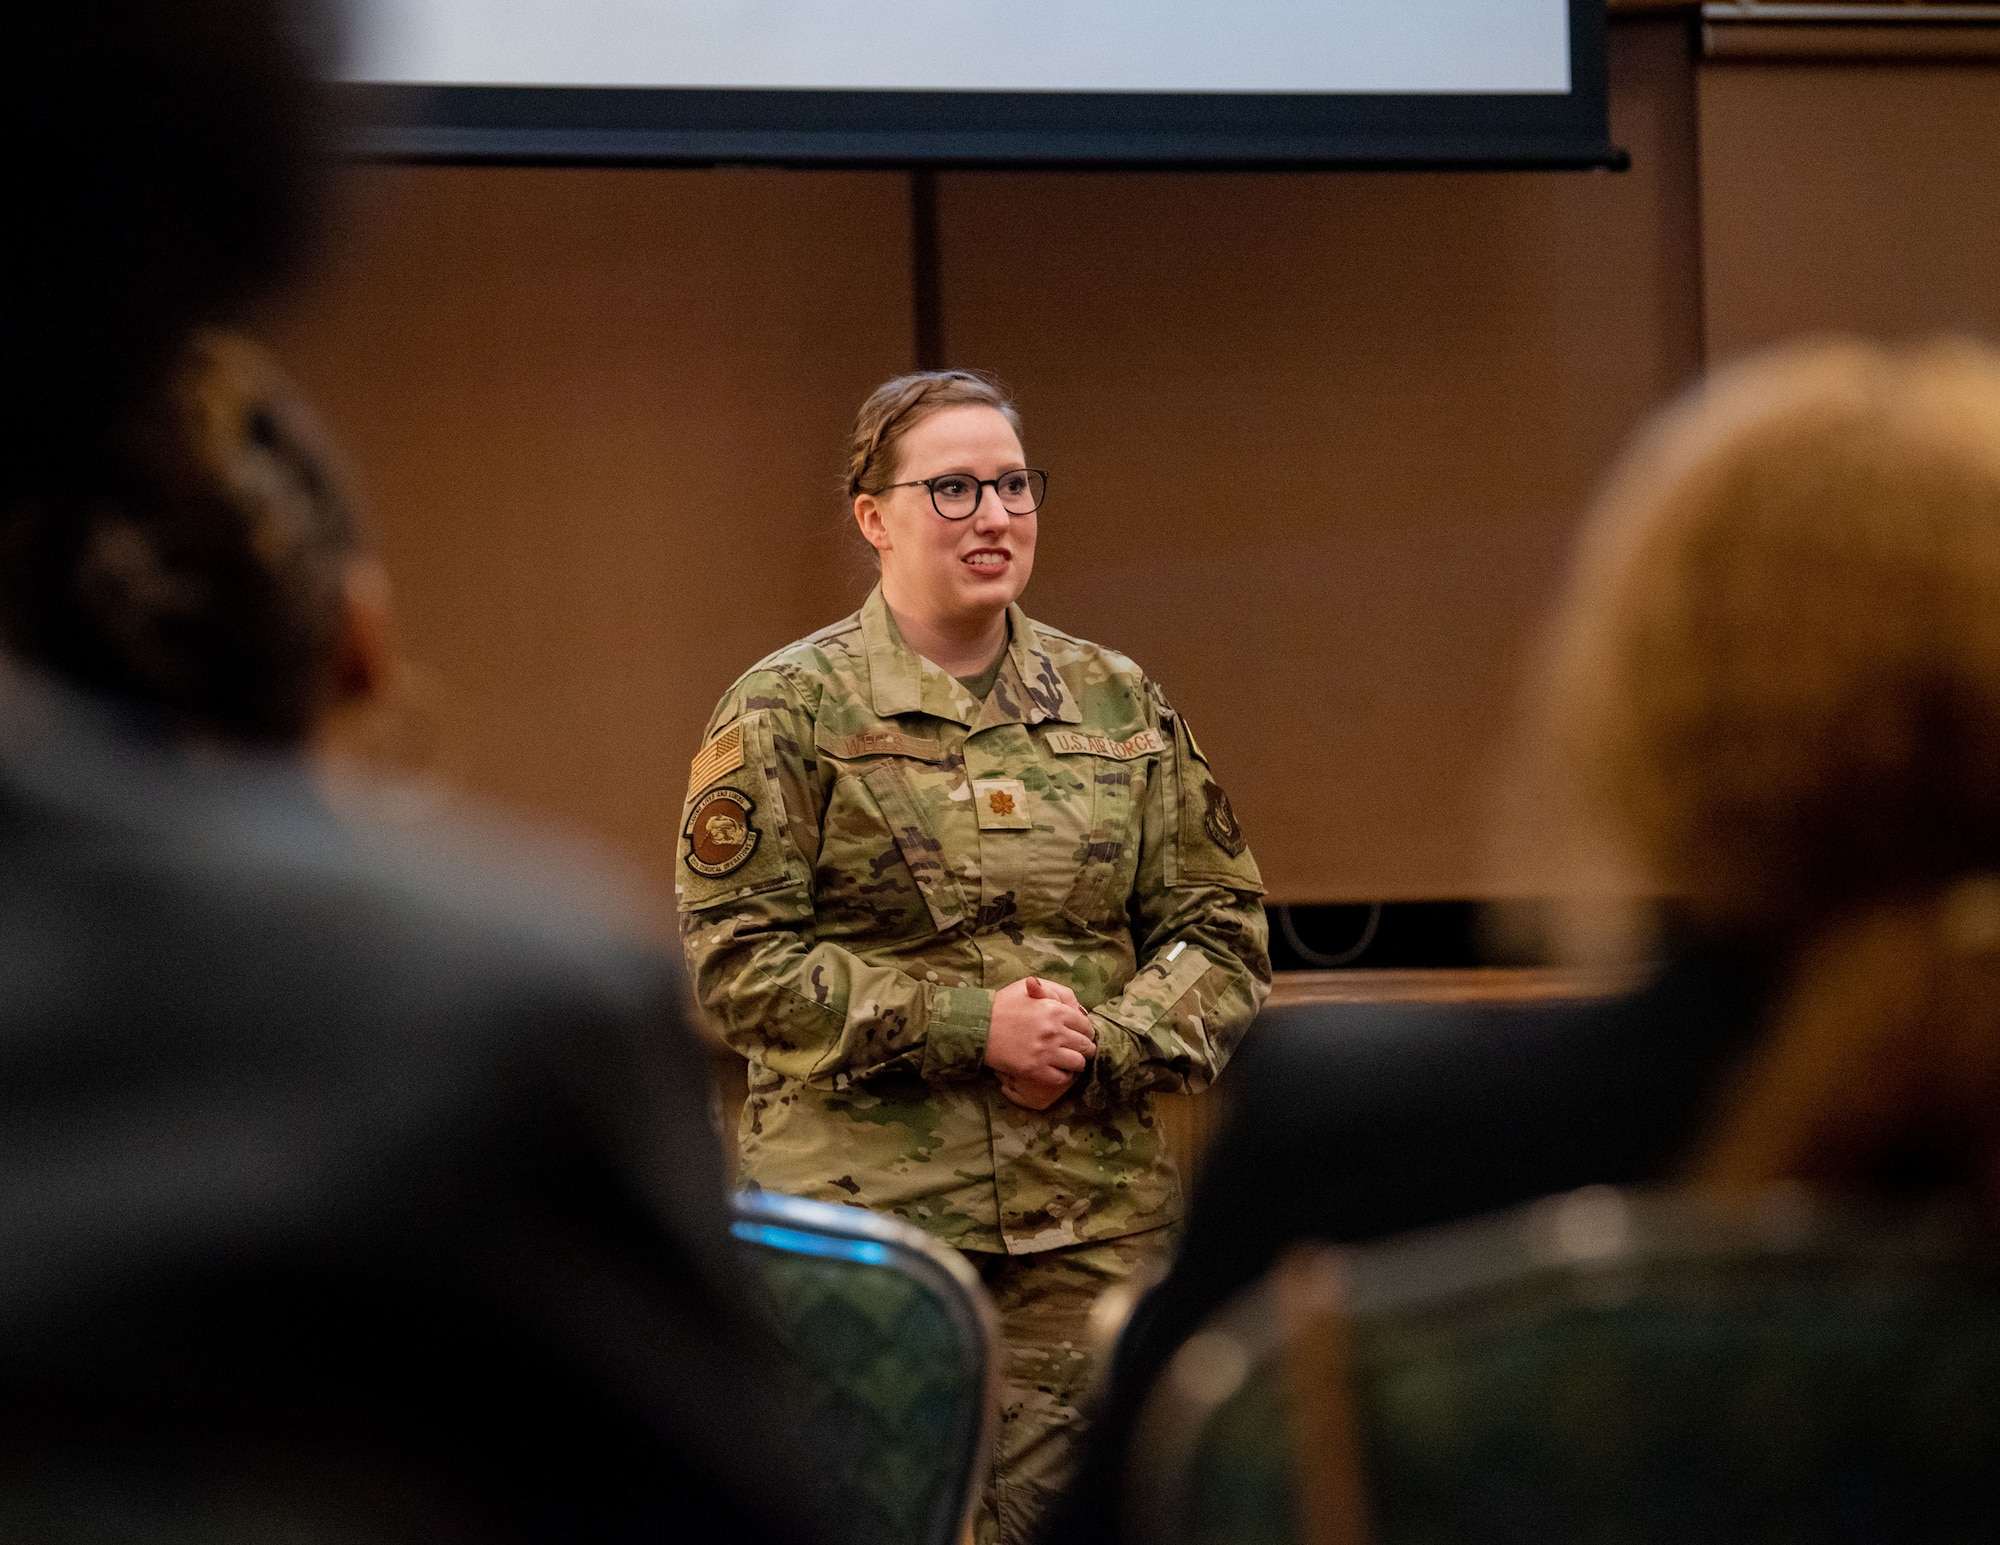 U.S. Air Force Maj. Justine Wells, 35th Surgical Operations Squadron labor and delivery element leader, shares her story during a Story Tellers event at Misawa Air Base, Japan, Oct. 19, 2022.